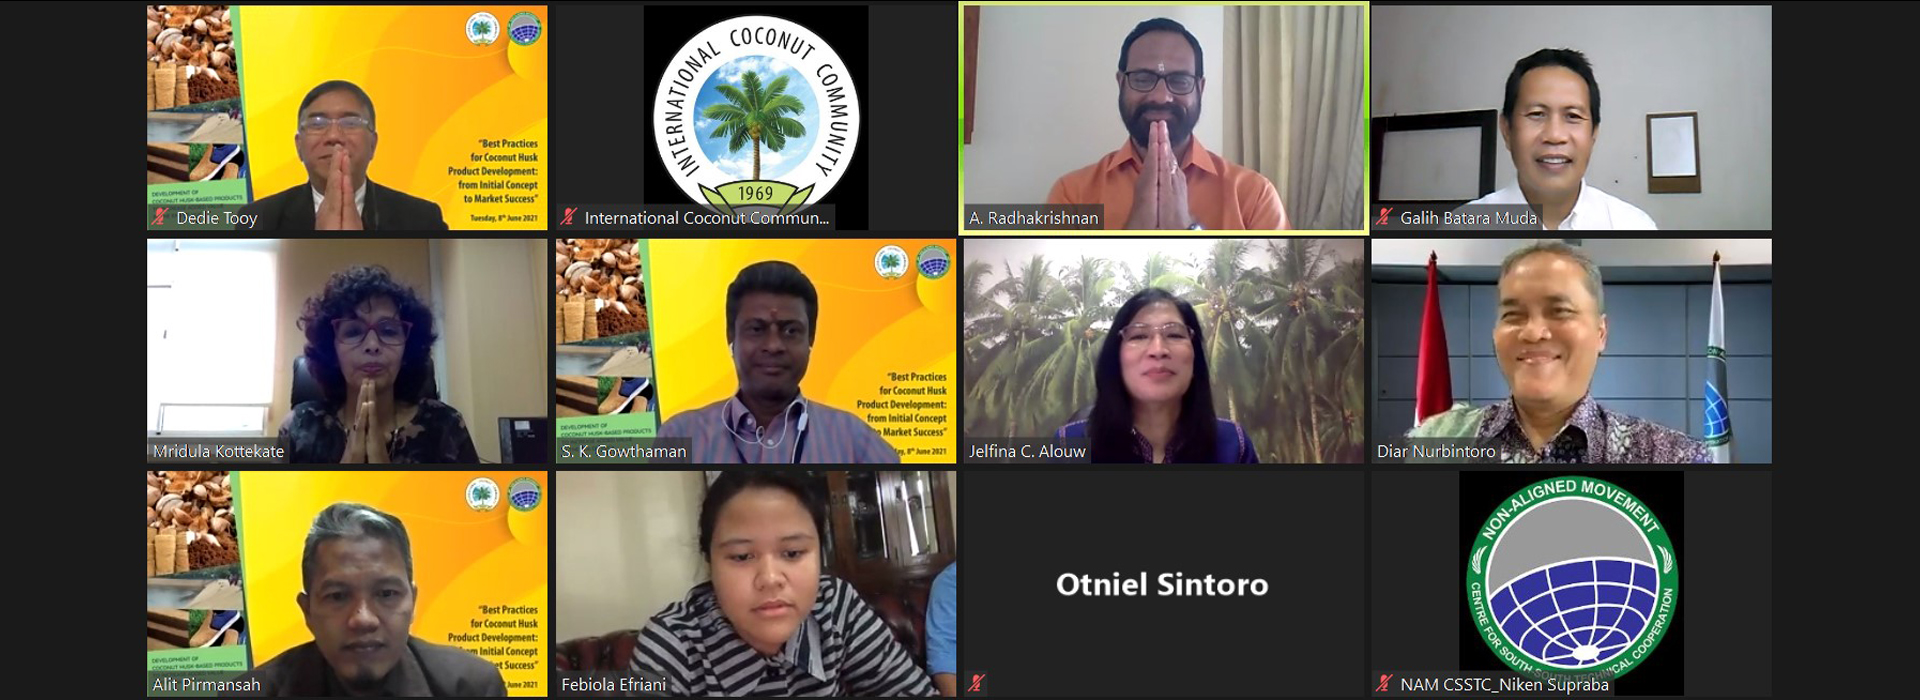 webinar-on-best-practices-for-coconut-husk-product-development-from-initial-concepts-to-market-success20211102161455.jpg